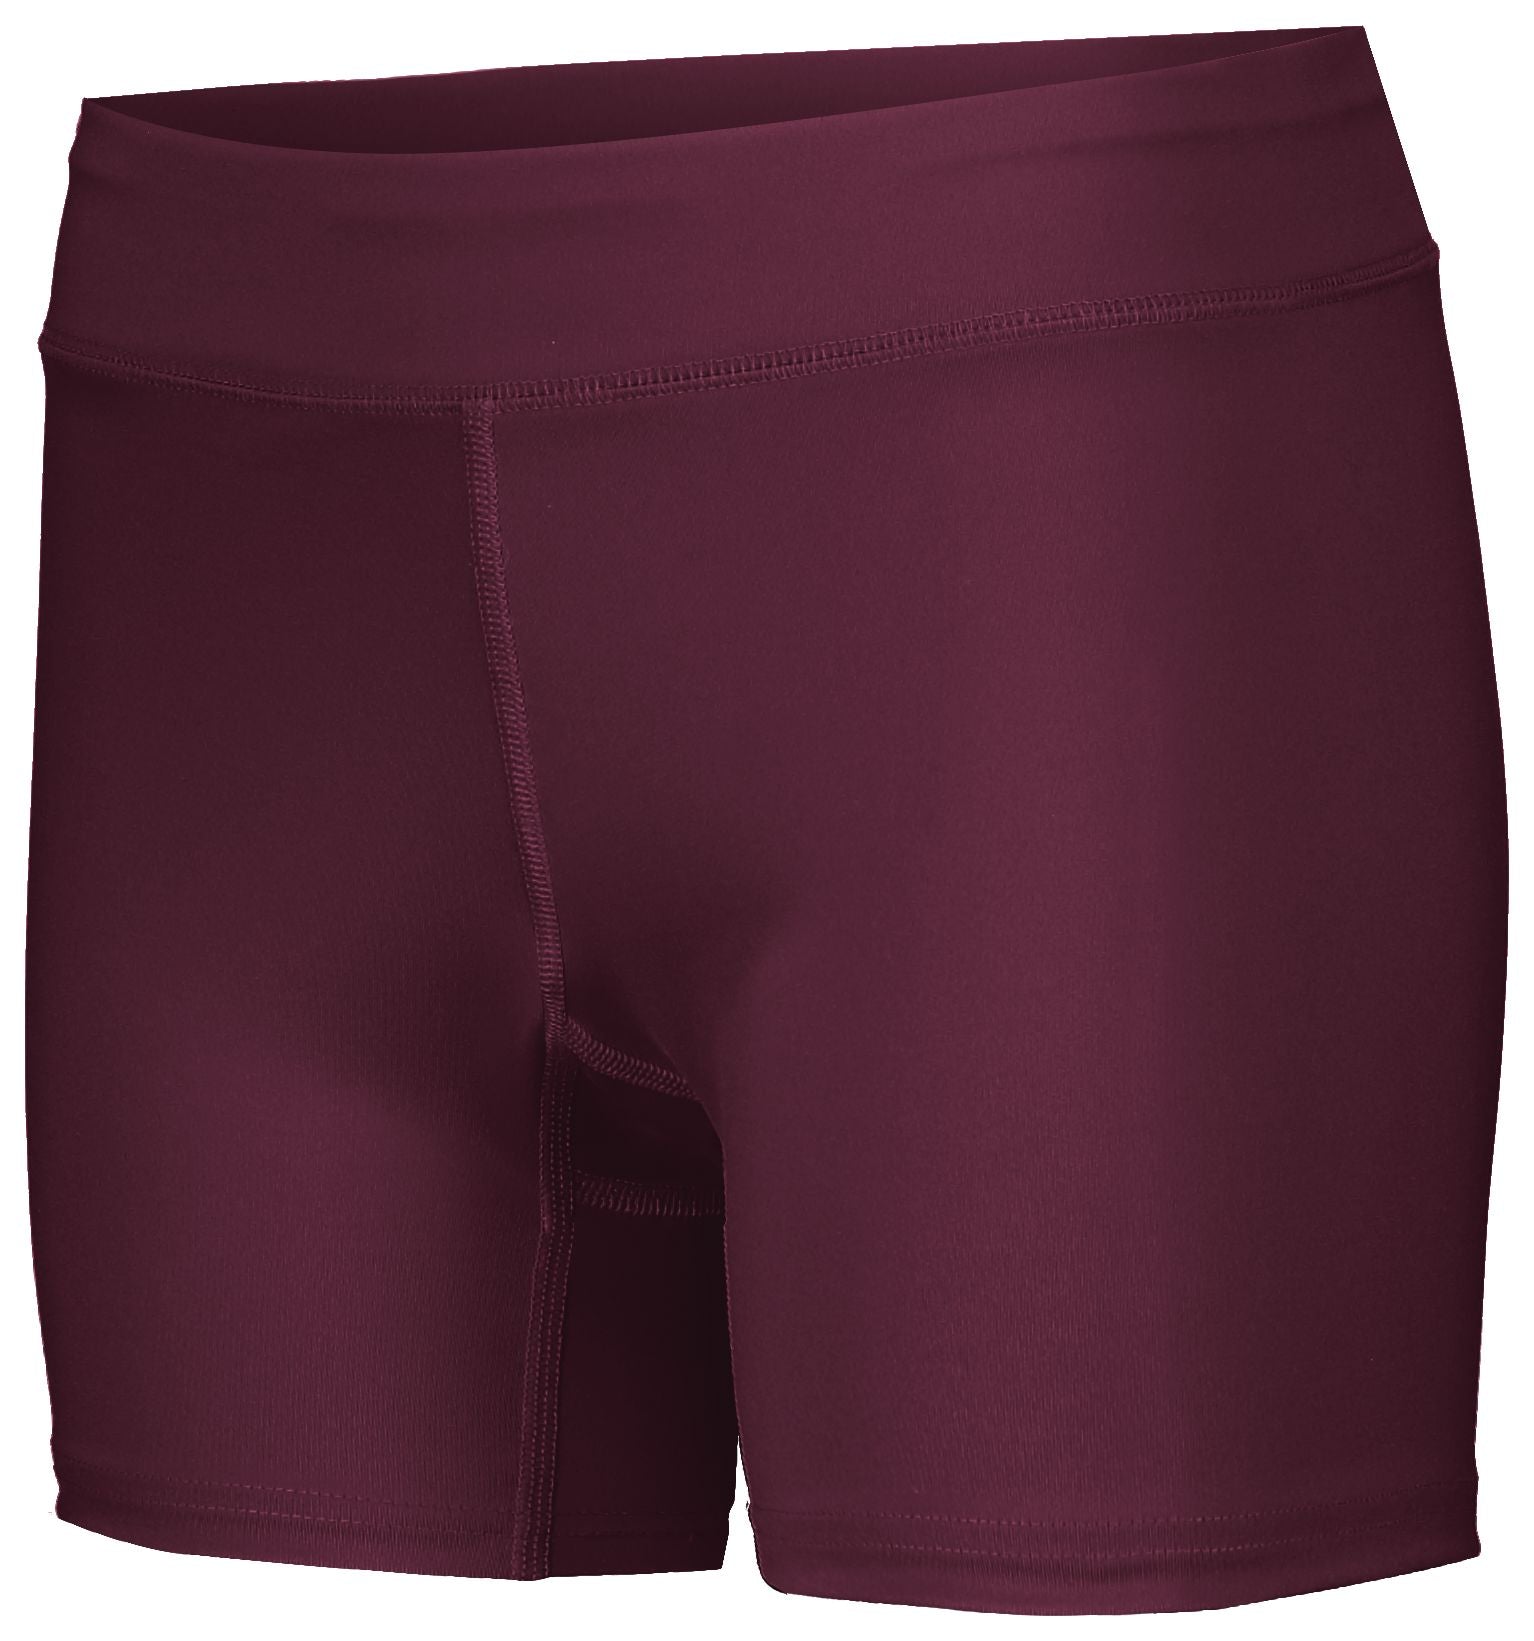 Holloway Ladies Pr Max Compression Shorts in Maroon (Hlw)  -Part of the Ladies, Ladies-Shorts, Track-Field, Holloway product lines at KanaleyCreations.com